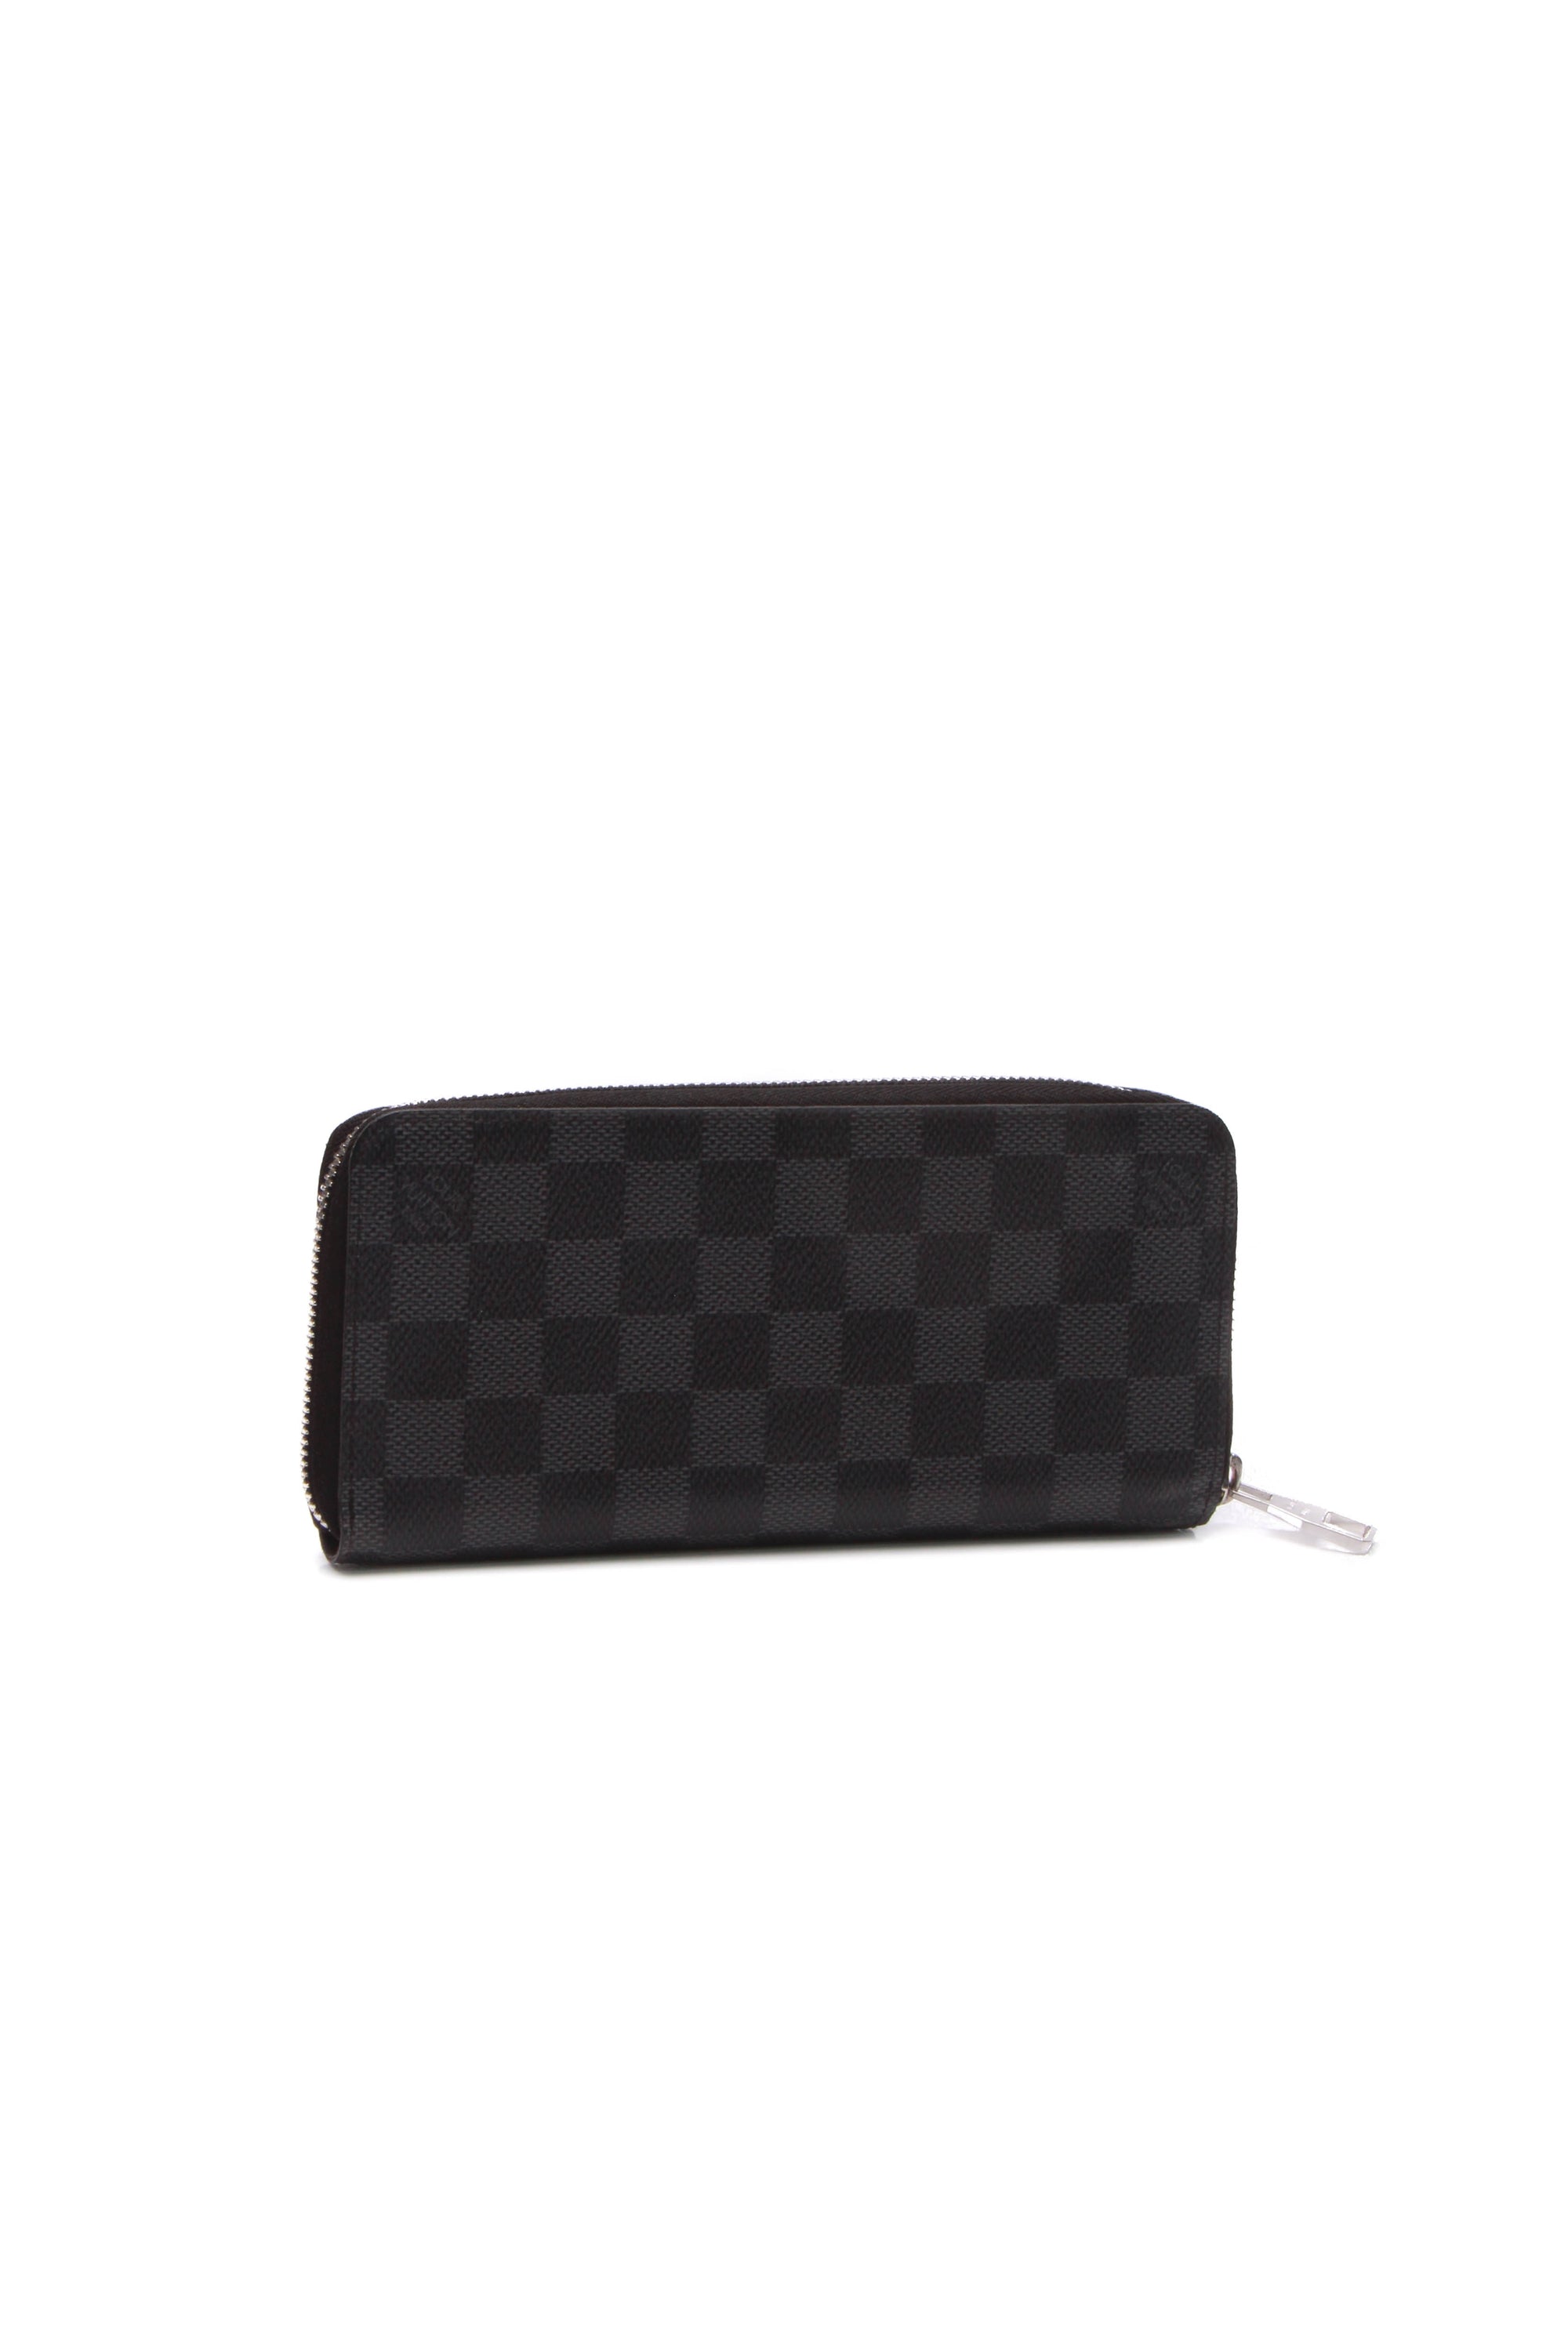 Lockme Zippy Coin Purse Lockme Leather - Wallets and Small Leather Goods